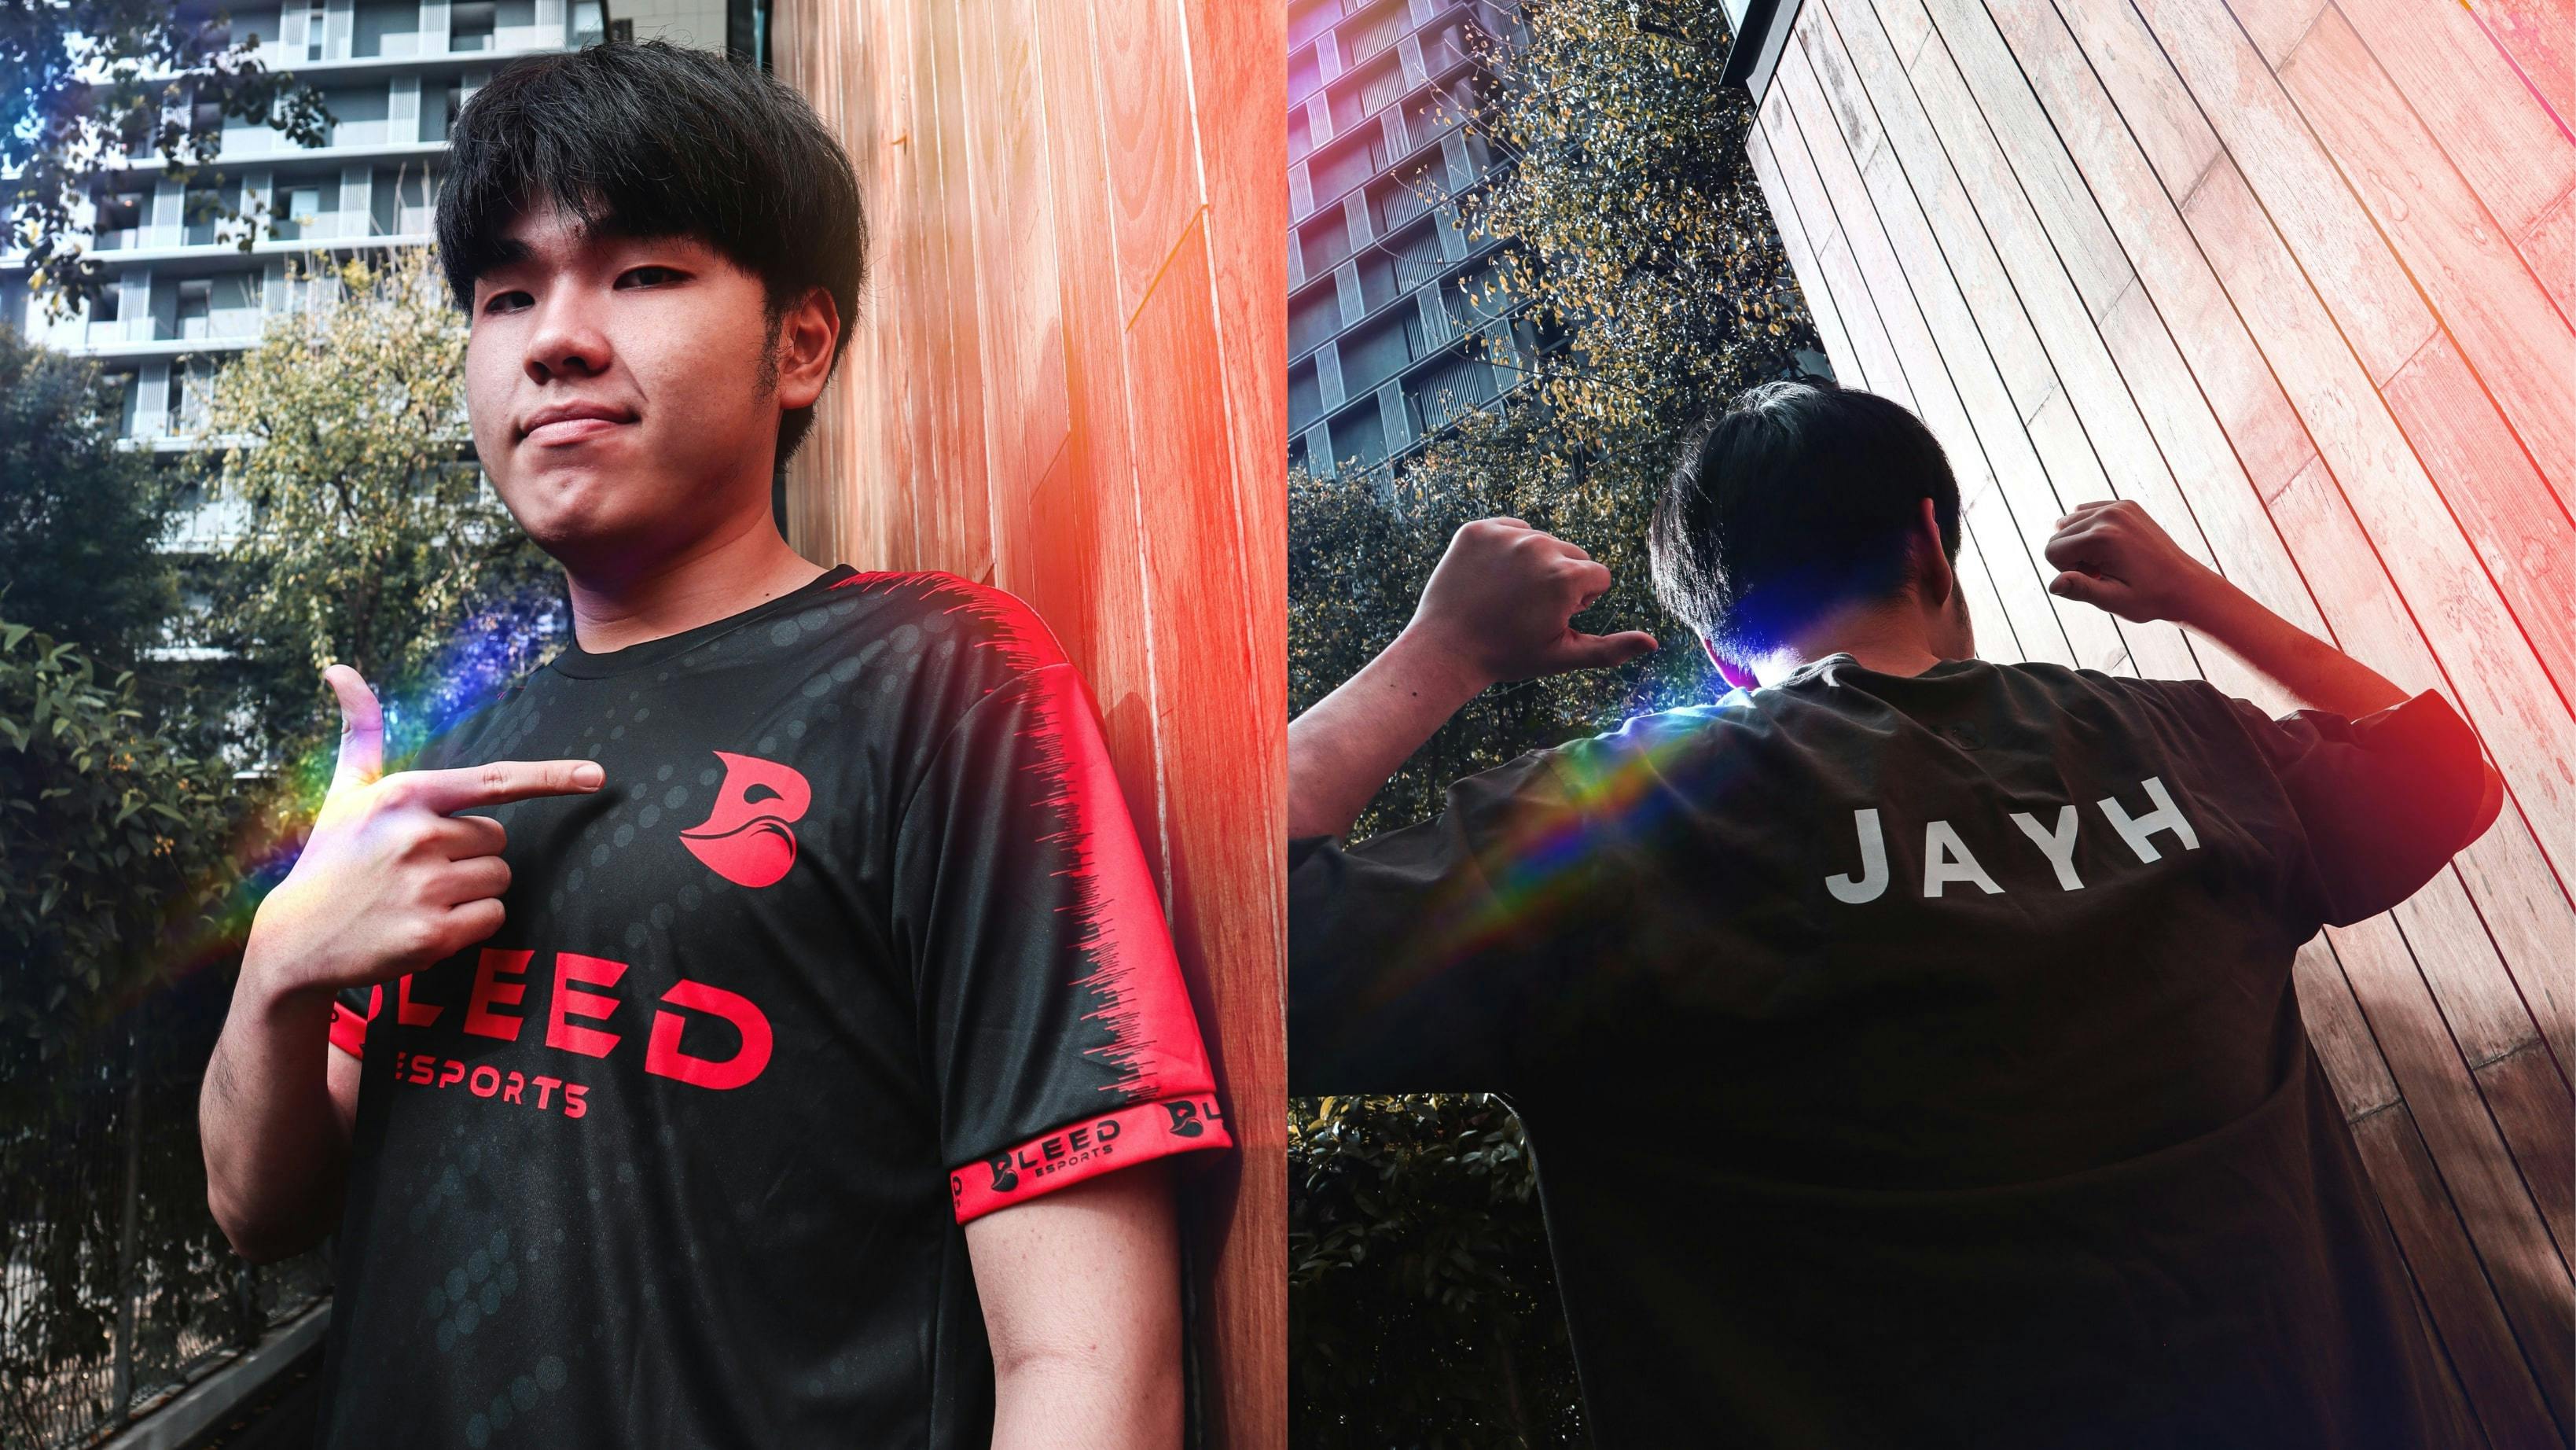 Global Esports look to sign JayH